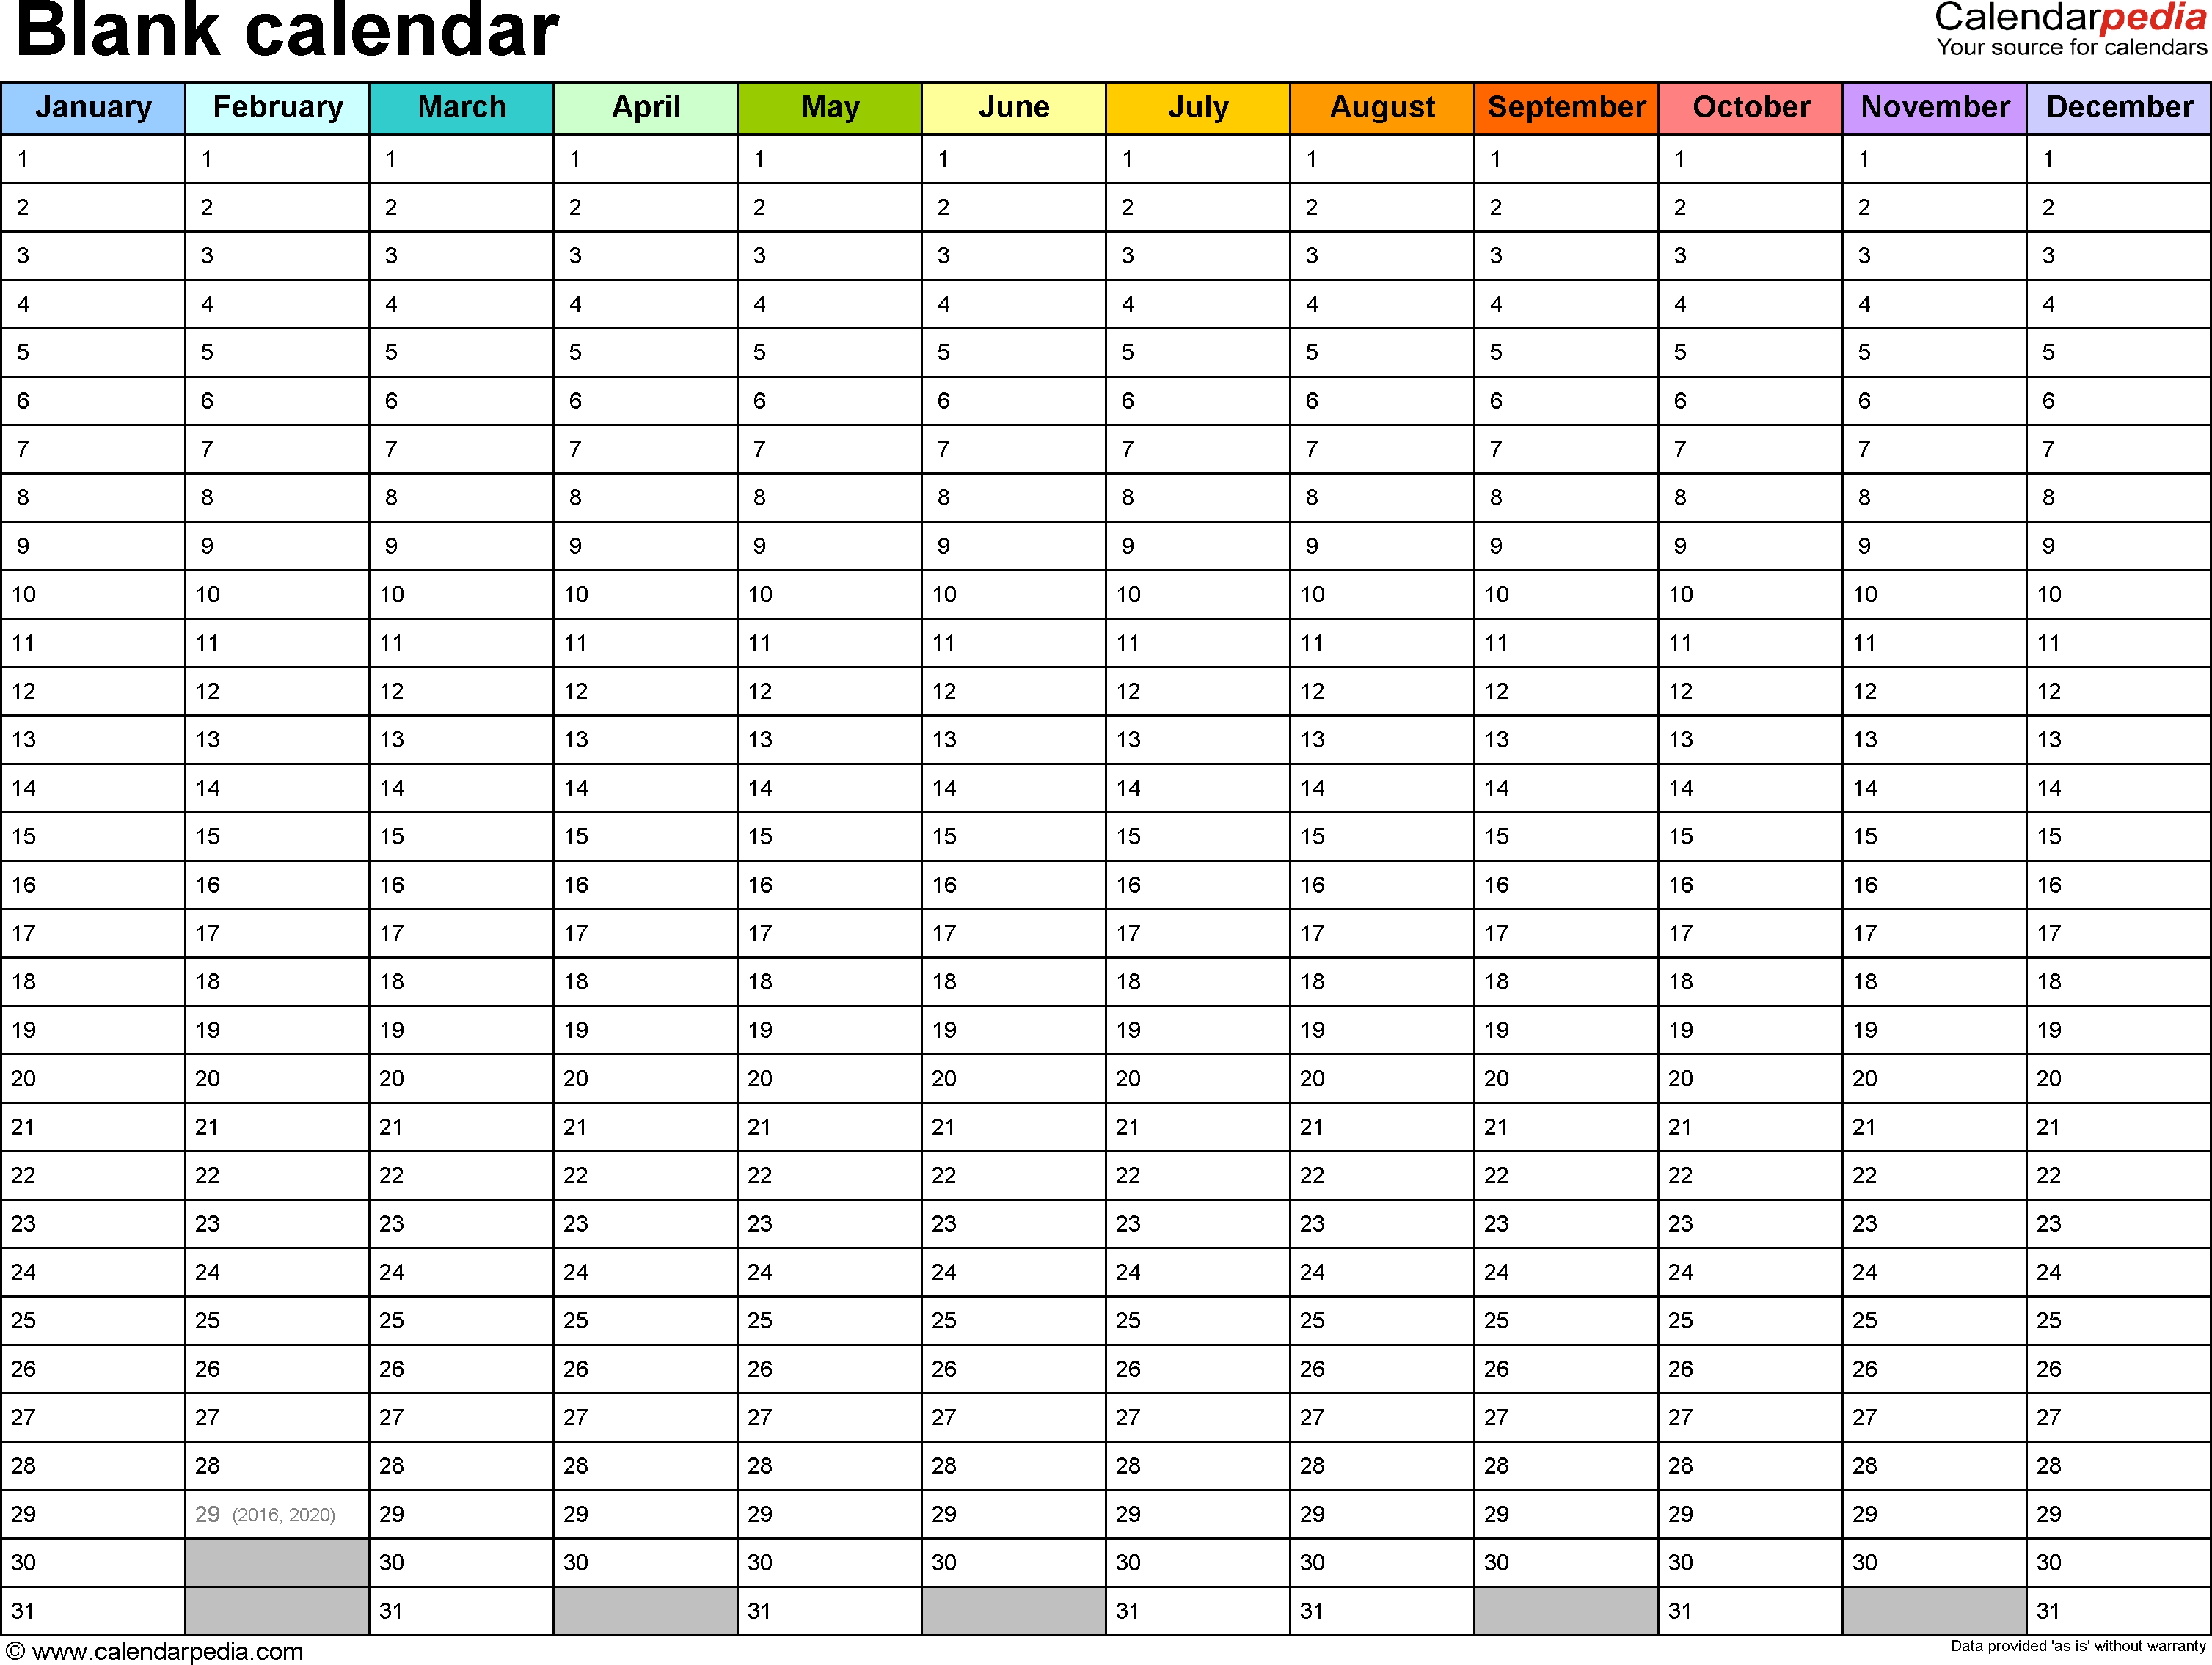 Blank Calendar - 9 Free Printable Microsoft Word Templates intended for Monthly Calendar On One Page